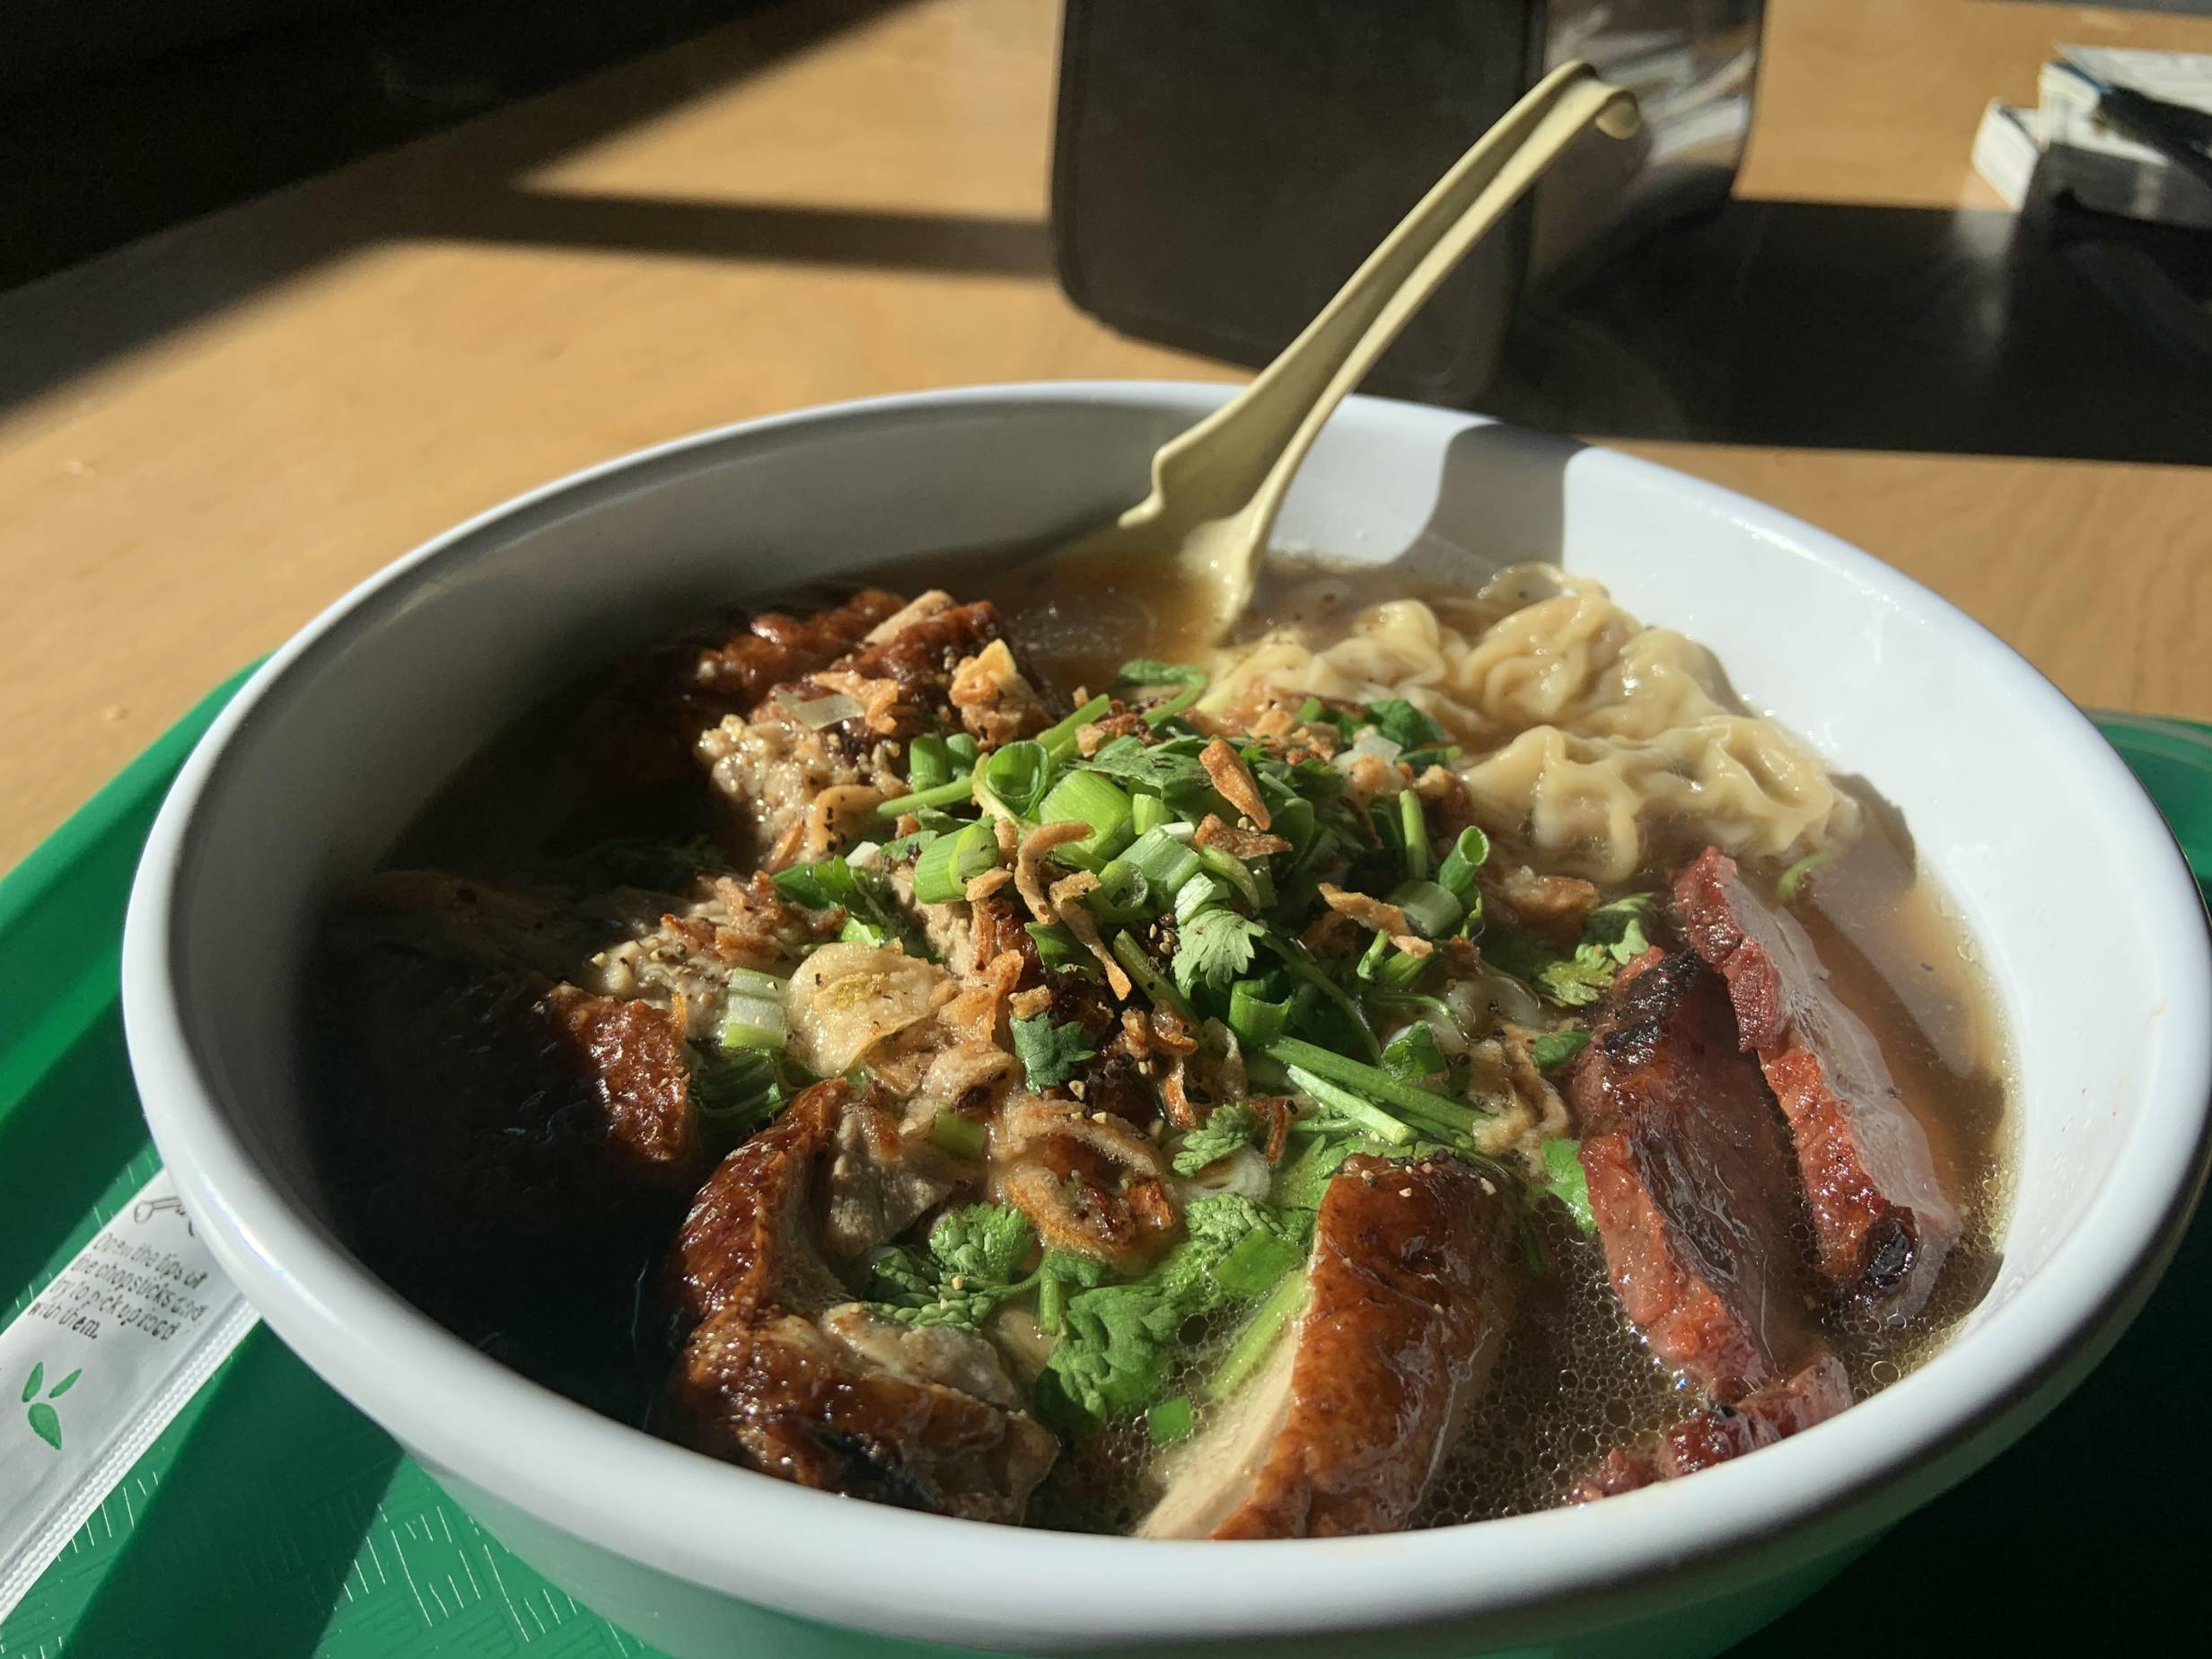 This epic bowl of wonton soup at 83 Vietnamese will cure what ails you